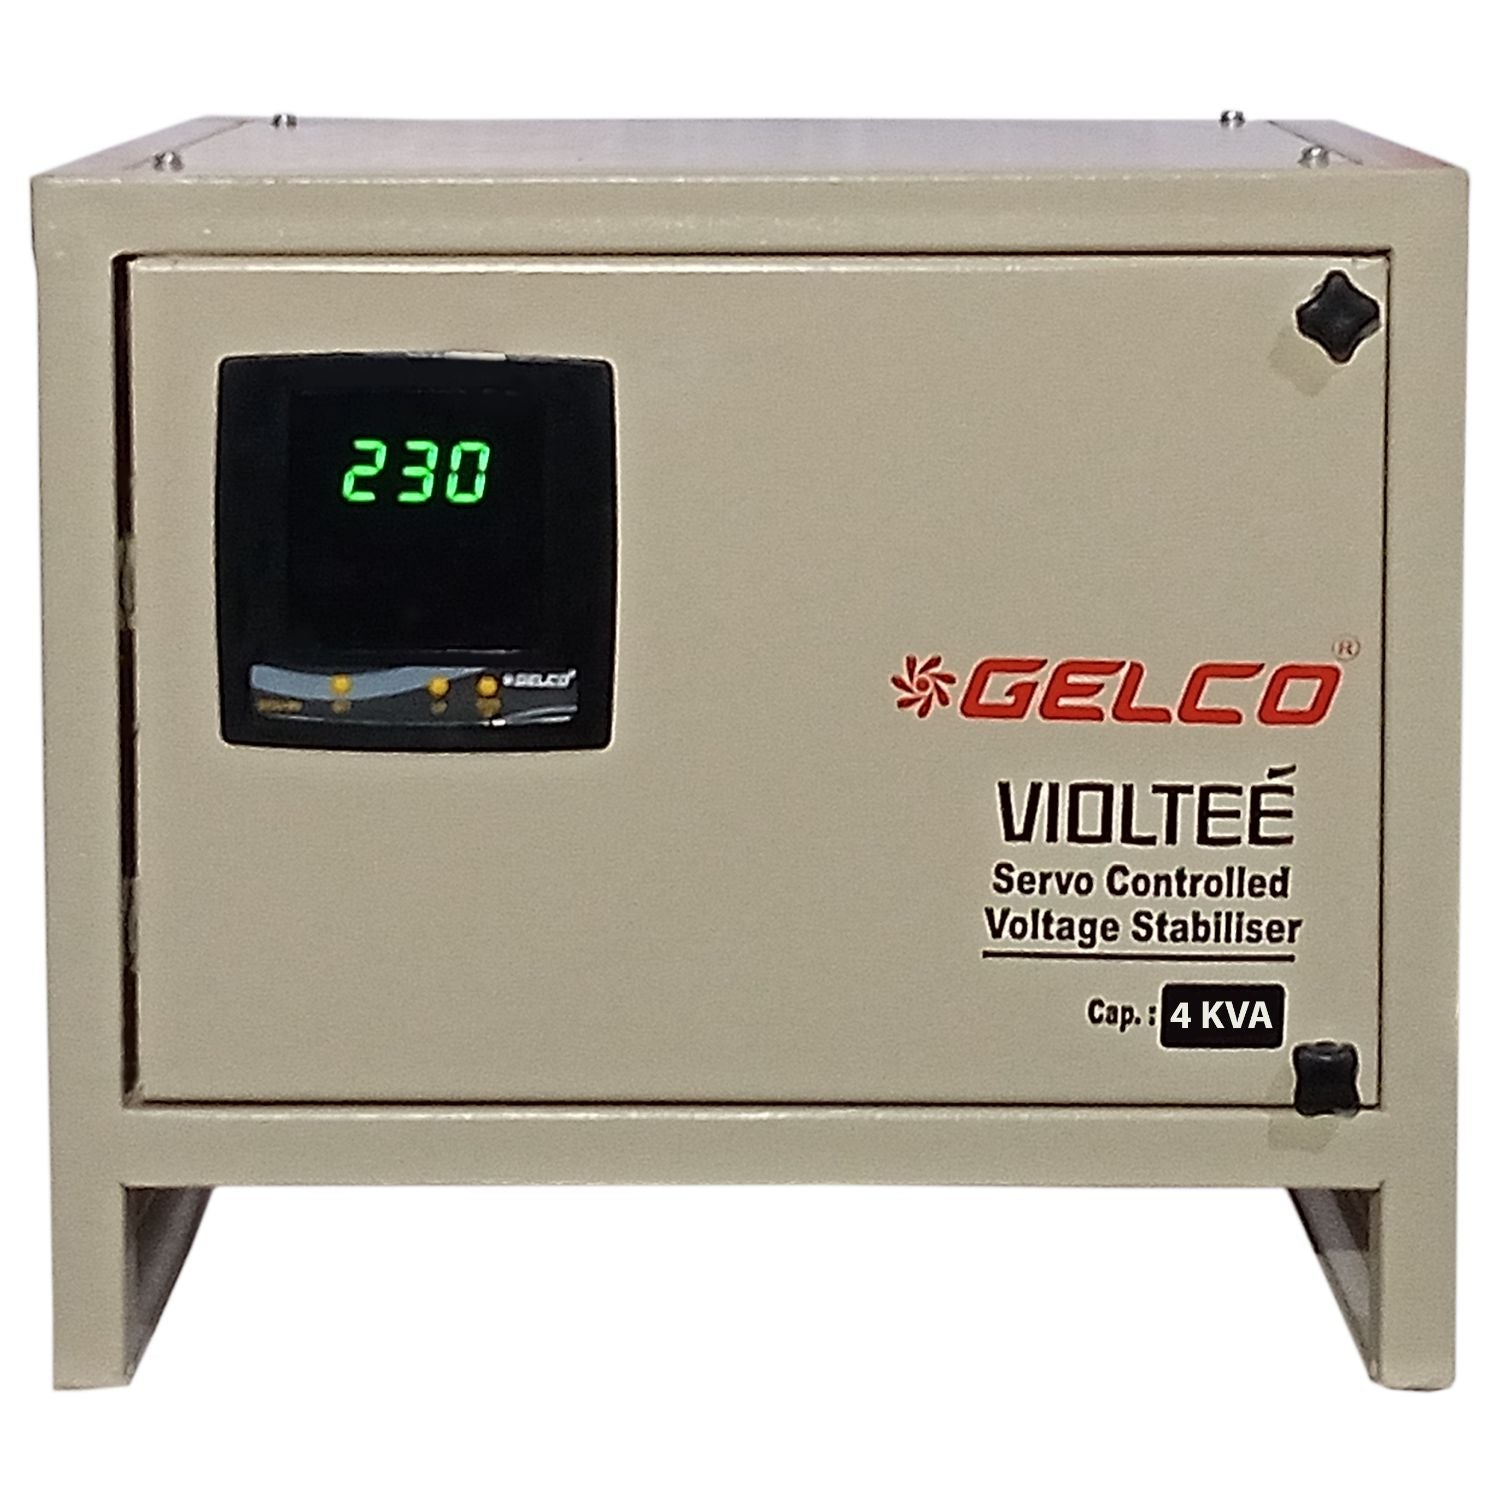 Servo Stabilizers 1 KVA to 4 KVA, Suitable For Air Conditioners (AC), LED TV, Home/Gym/Hospital/Offices - Gelco Electronics Pvt. Ltd.